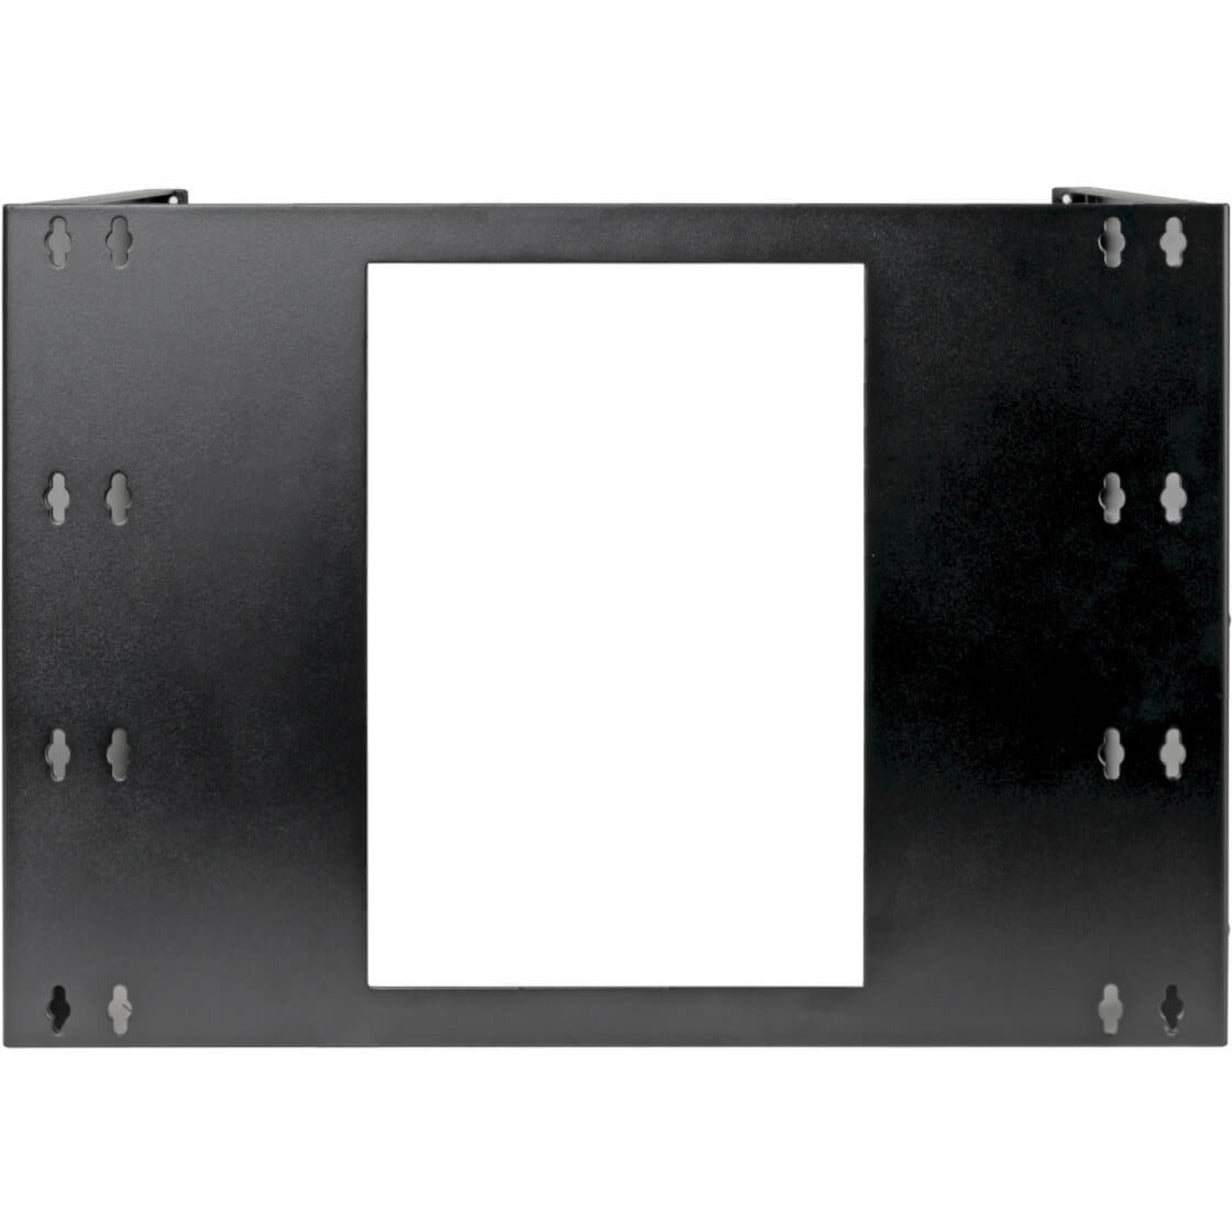 Tripp Lite SRWO8UBRKT 8U Wall-Mount Bracket for Small Switches and Patch Panels, Hinged